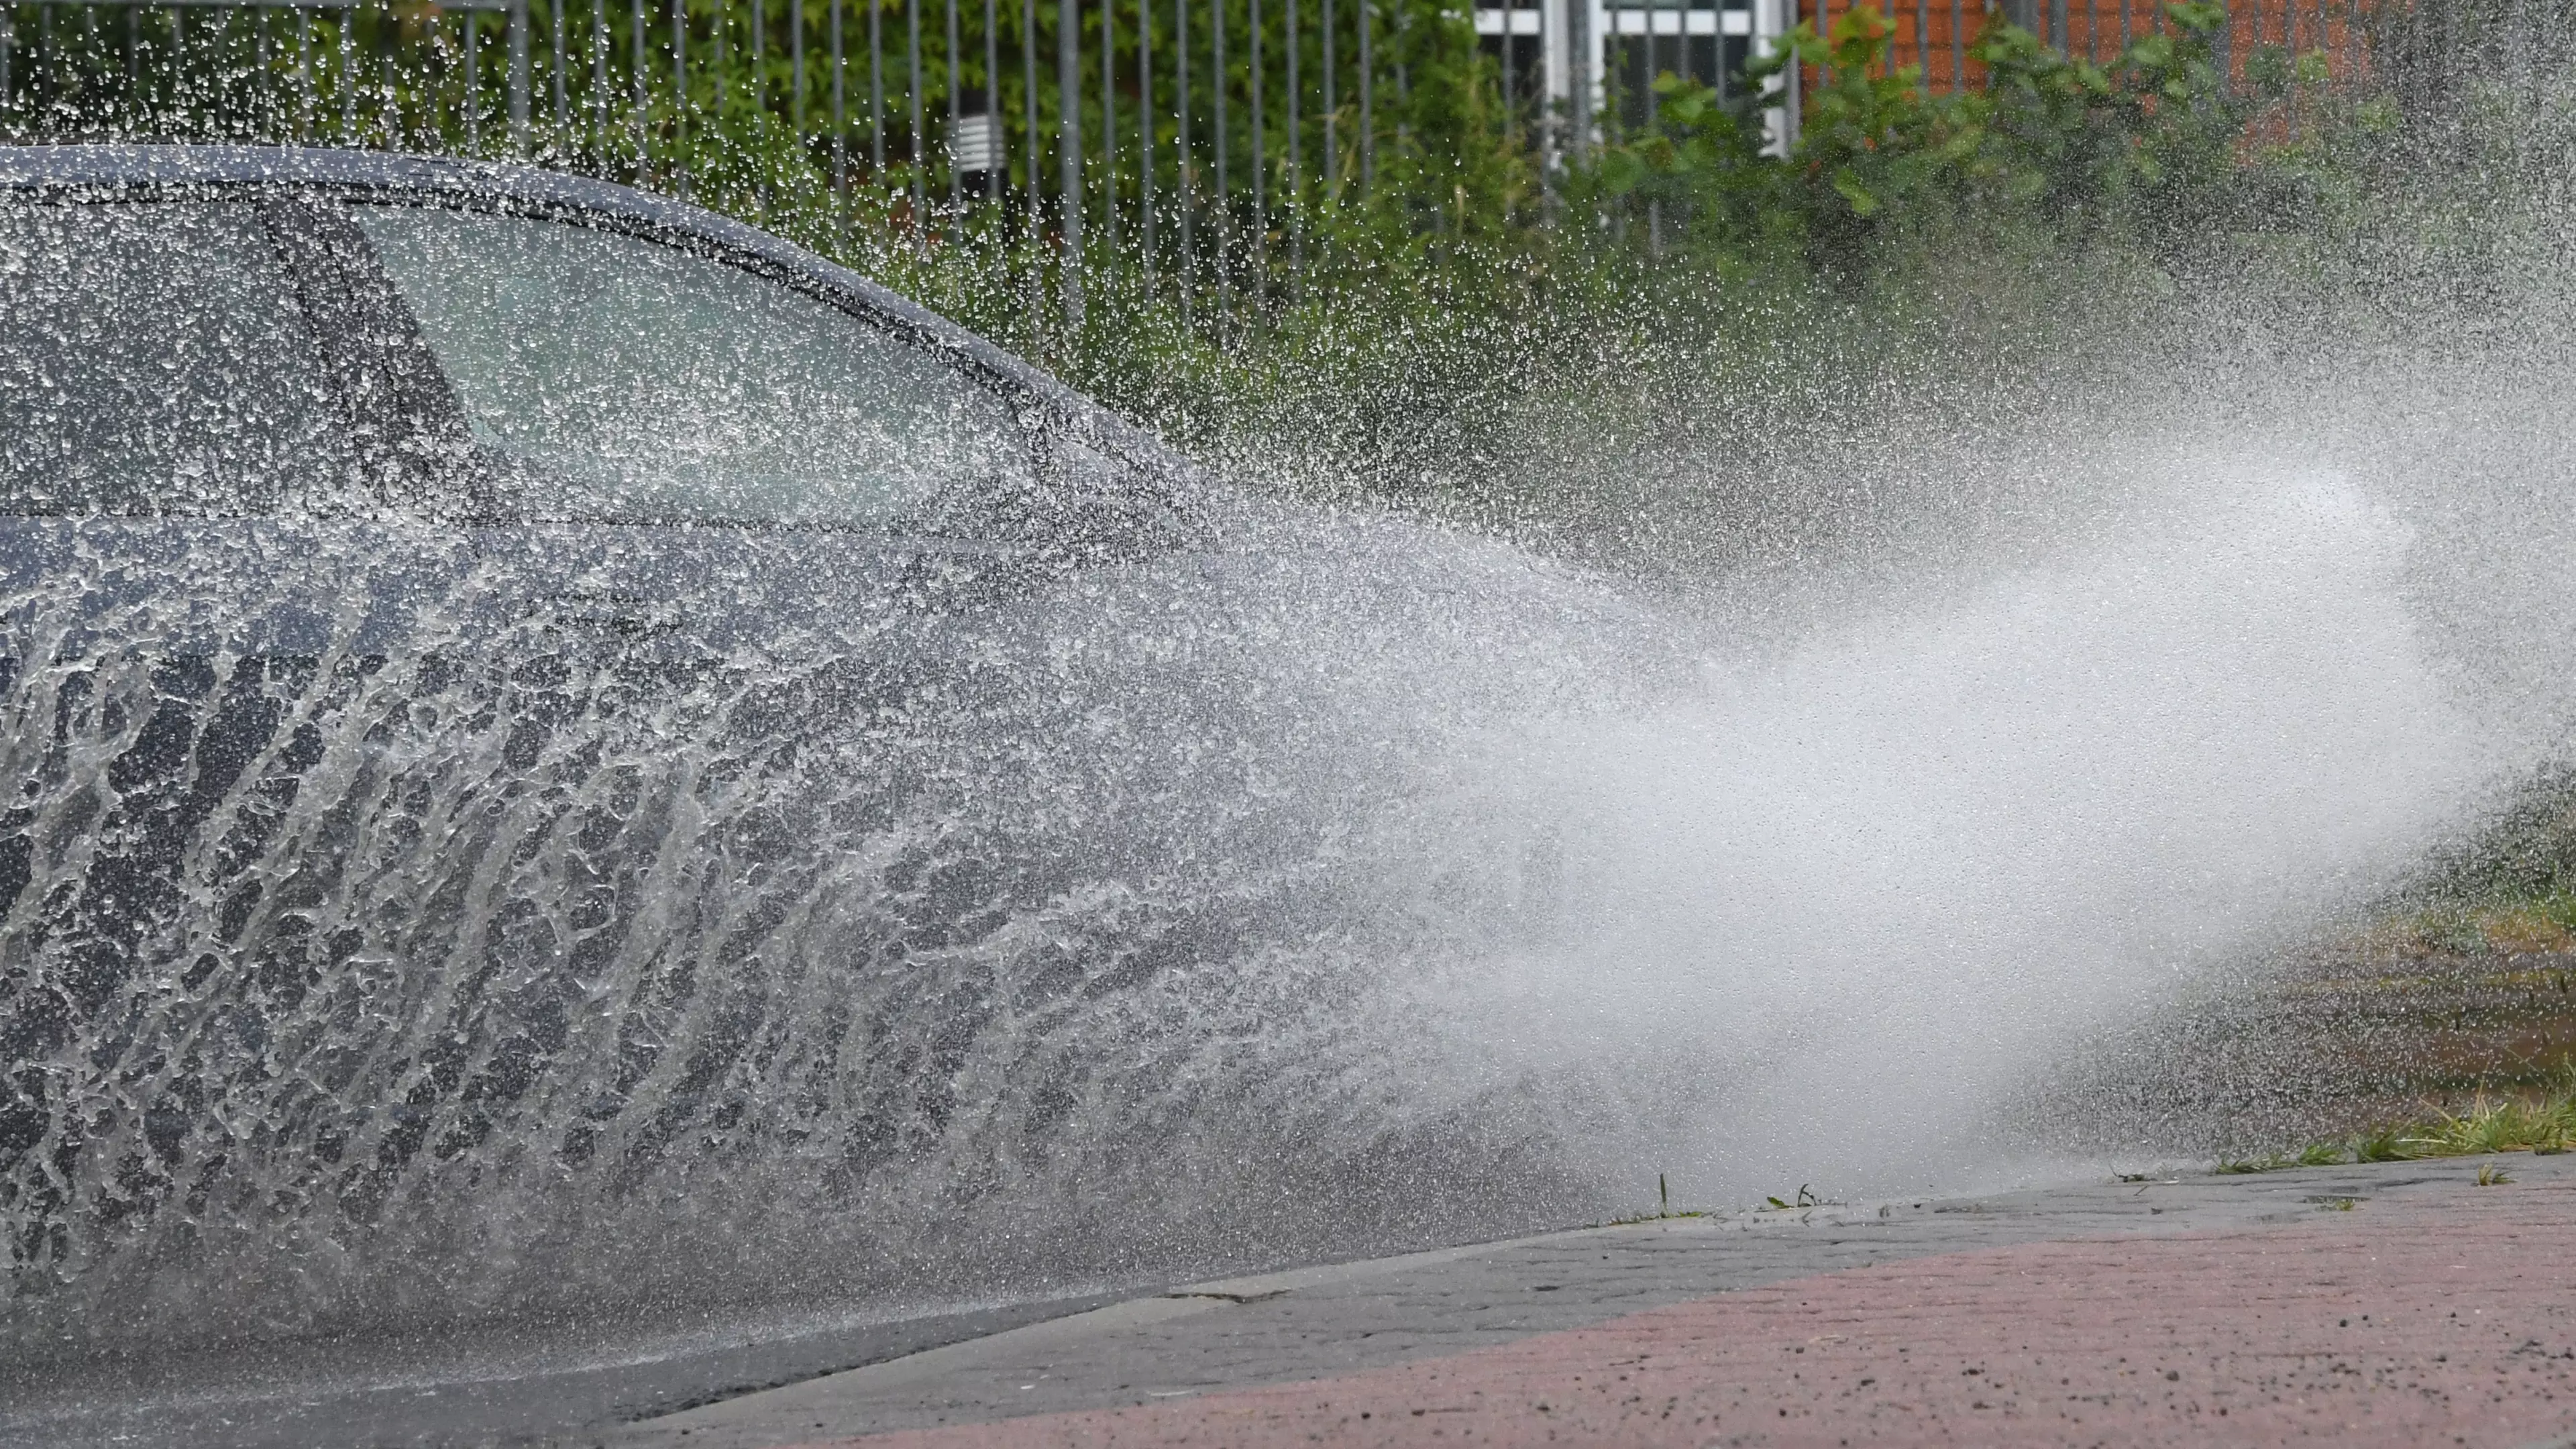 Drivers Who Purposefully Splash Pedestrians Could Face £5,000 Fine